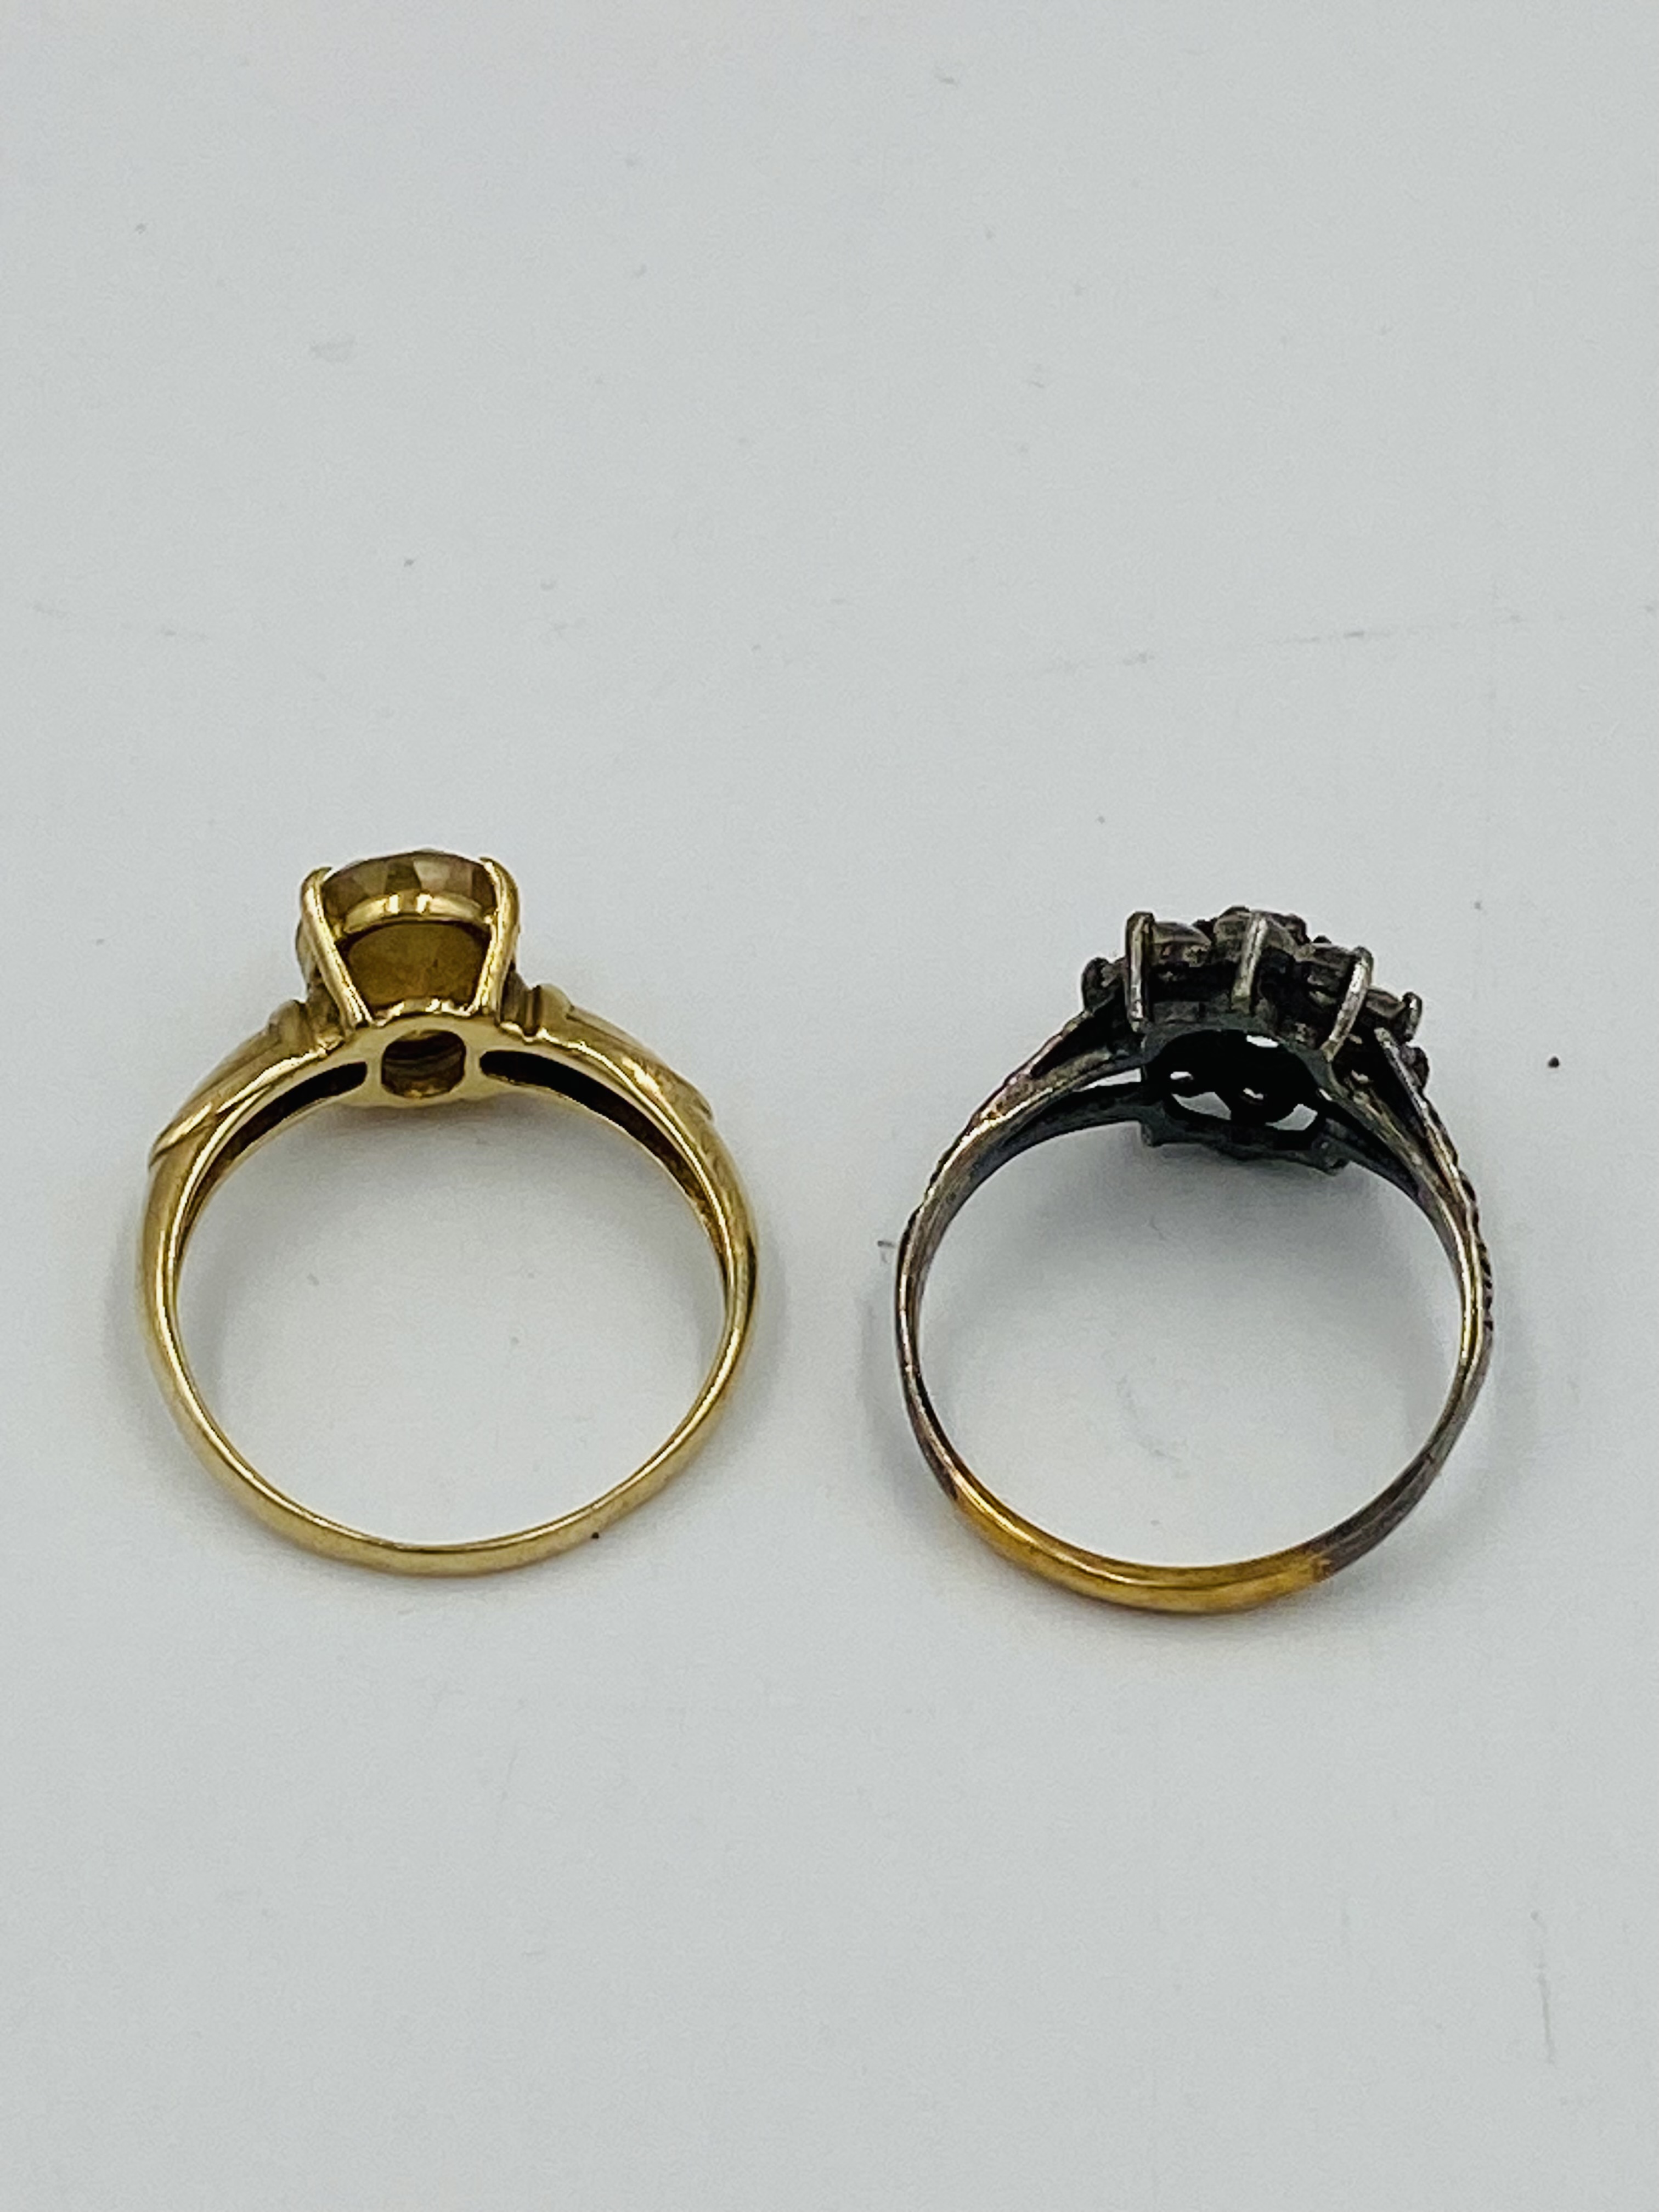 9ct gold ring set with a clear stone, 3g; together with a 9ct gold ring - Image 4 of 4